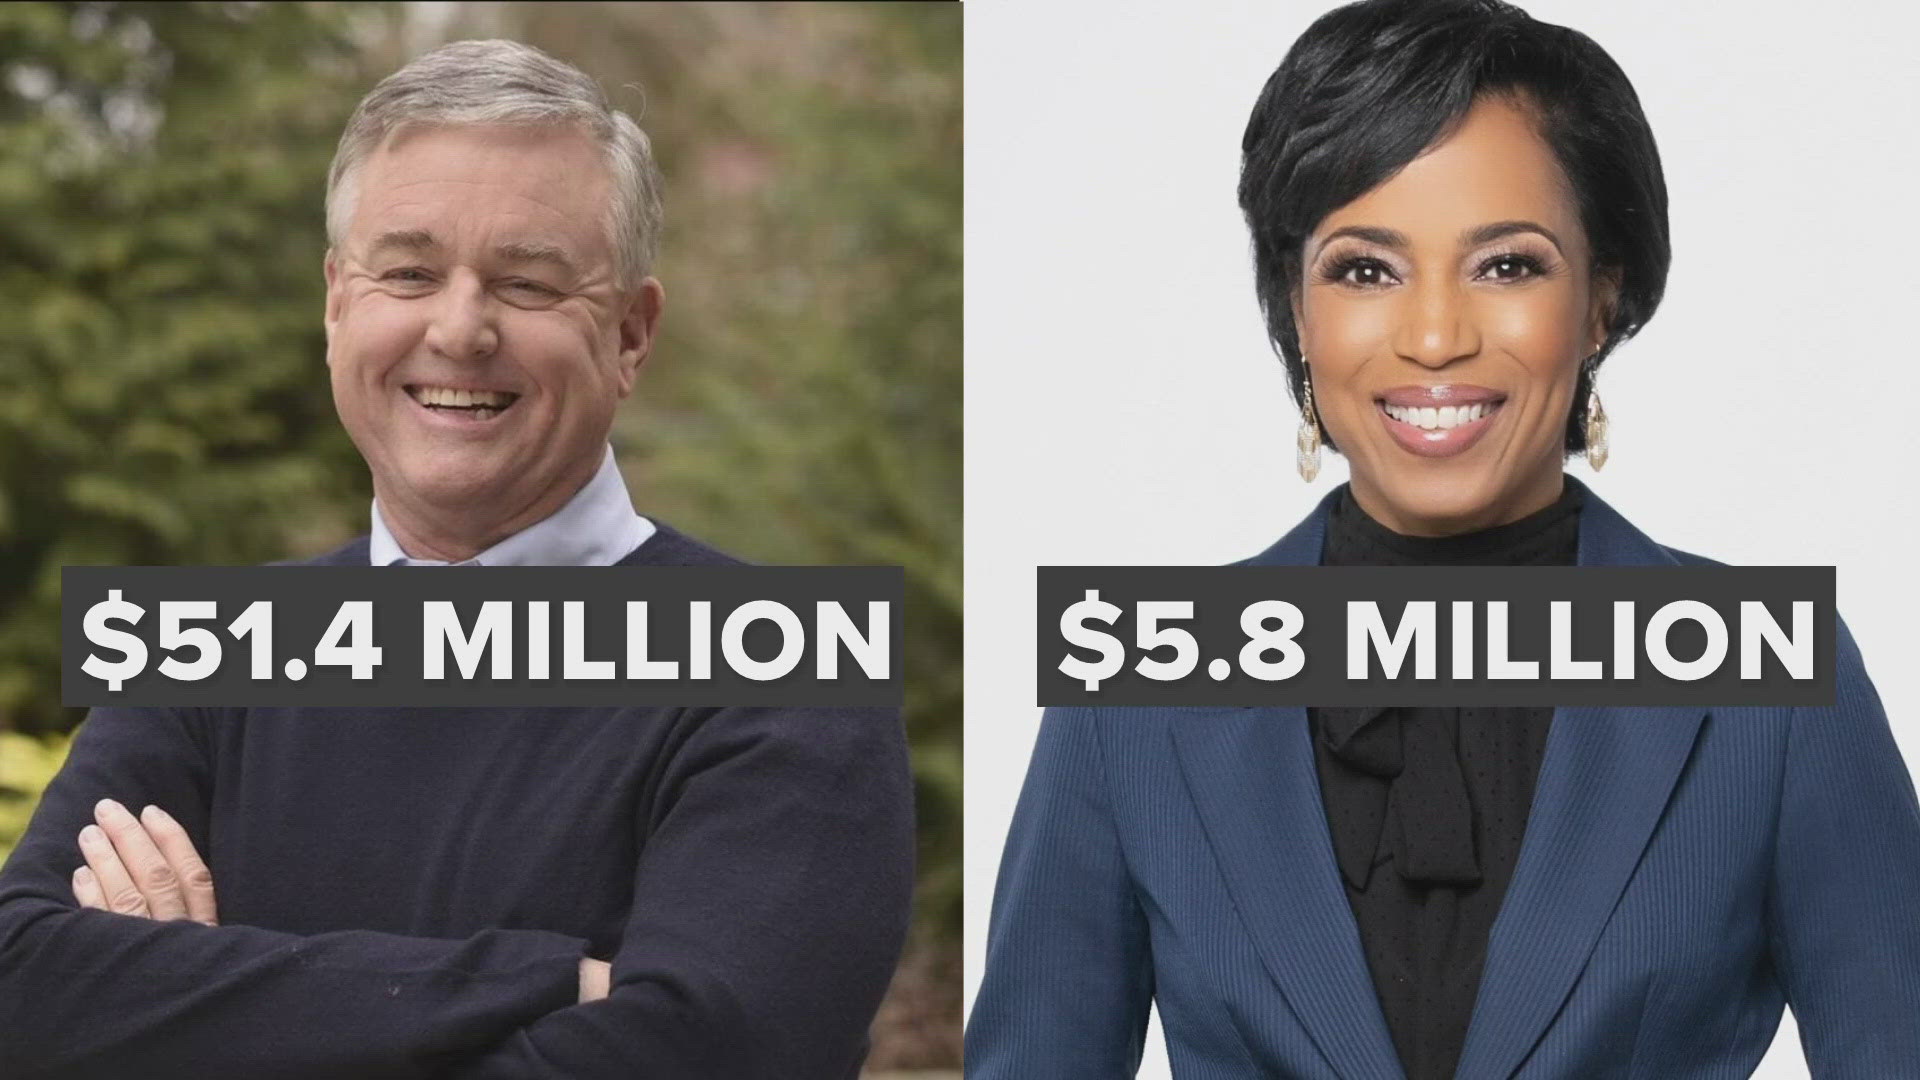 THE BATTLE BETWEEN DEMOCRATIC SENATE CANDIDATES.... ANGELA ALSOBROOKS AND DAVID TRONE IS EXTREMELY CLOSE.